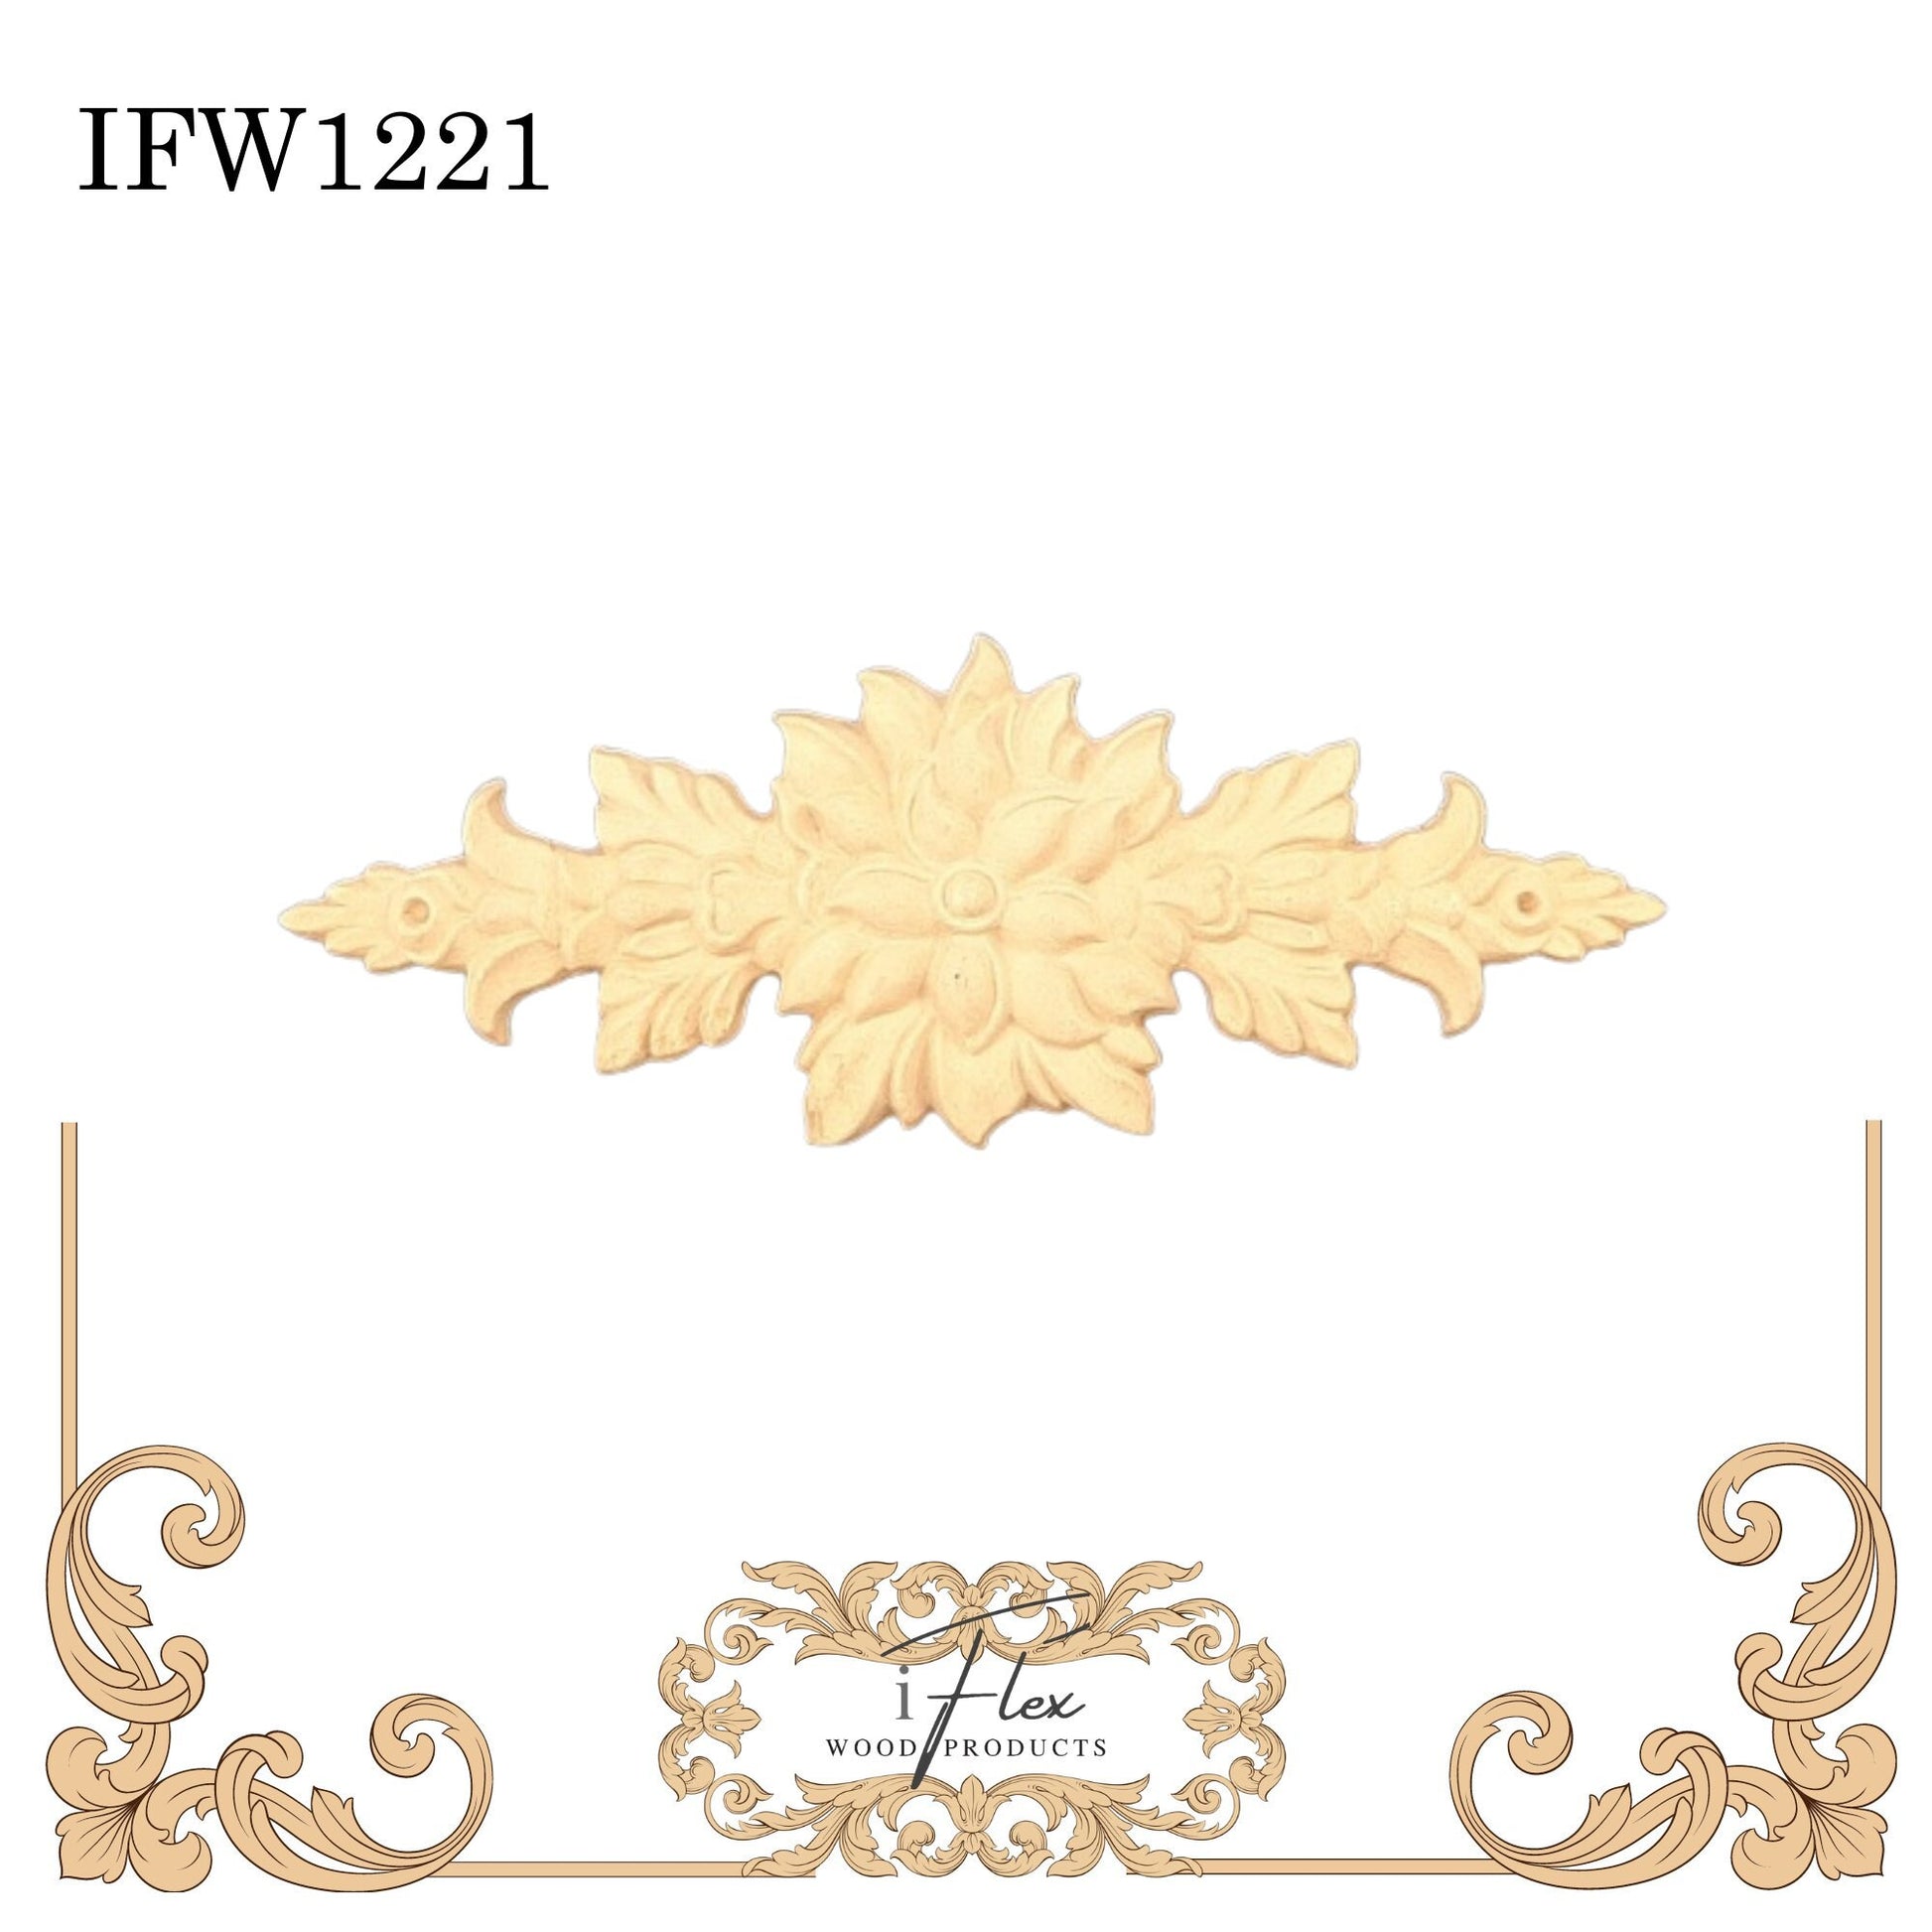 IFW 1221 iFlex Wood Products, bendable mouldings, flexible, wooden appliques, flower garland, christmas